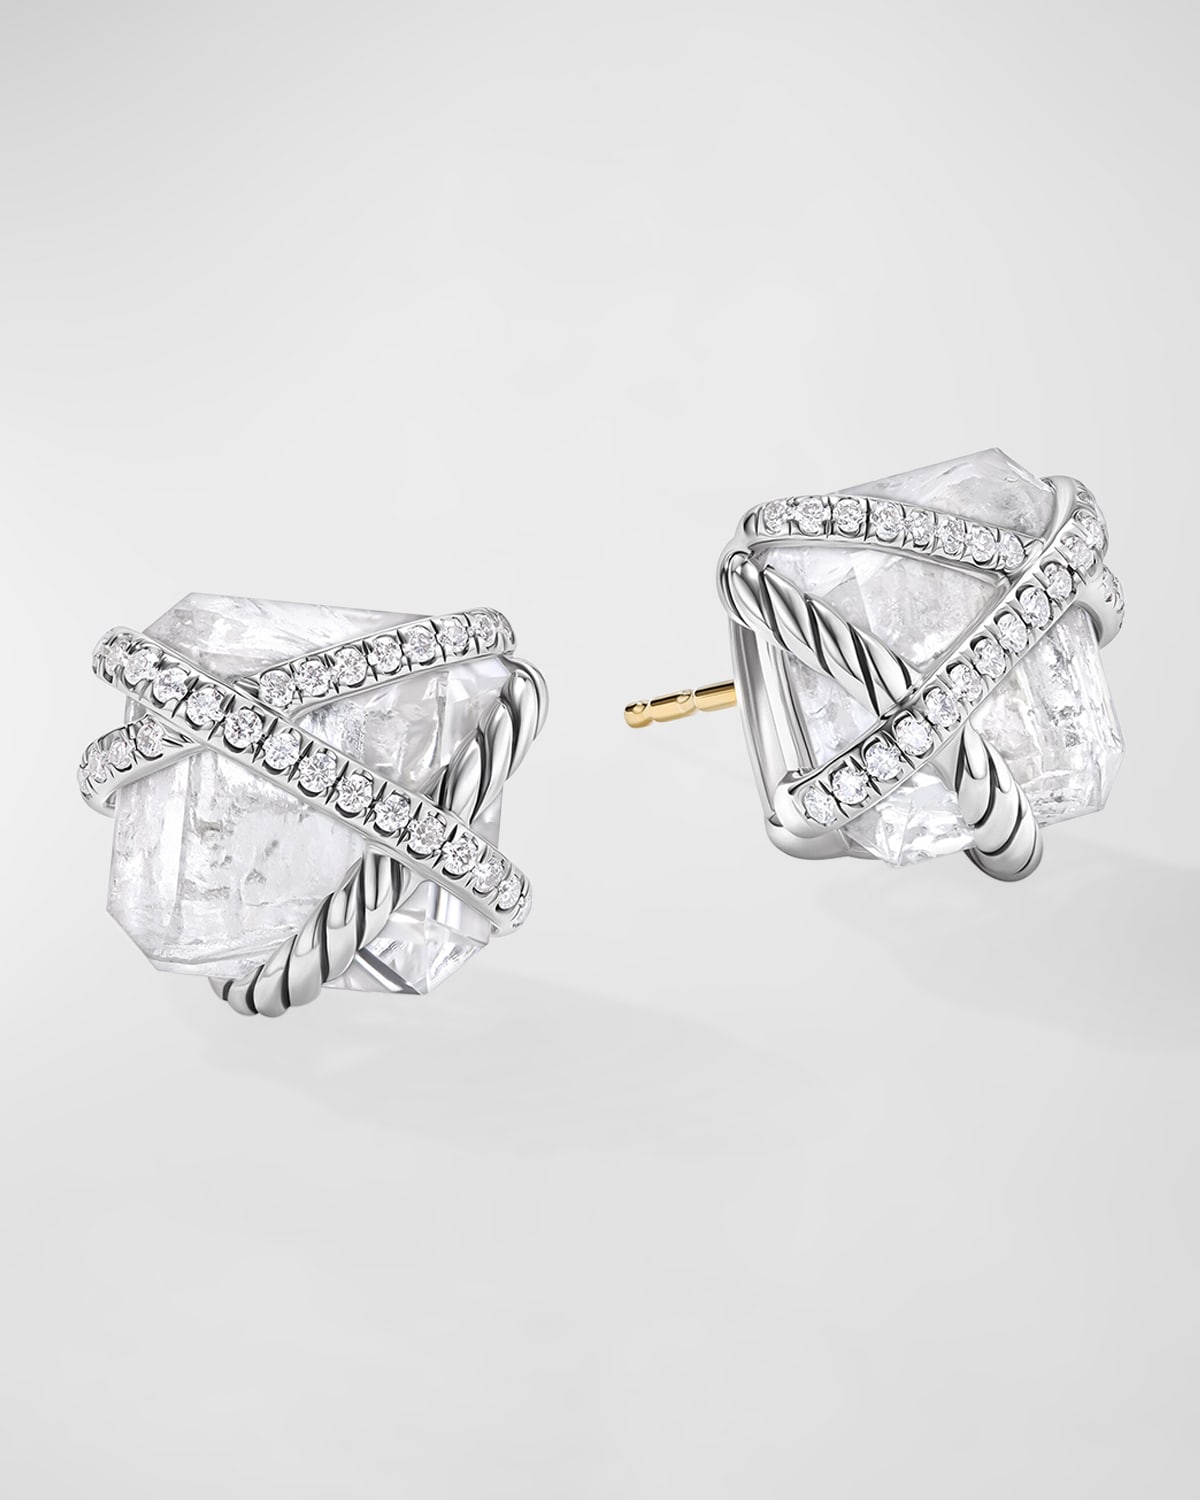 Cable Wrap Stud Earrings with Crystal and Diamonds in Silver, 12mm